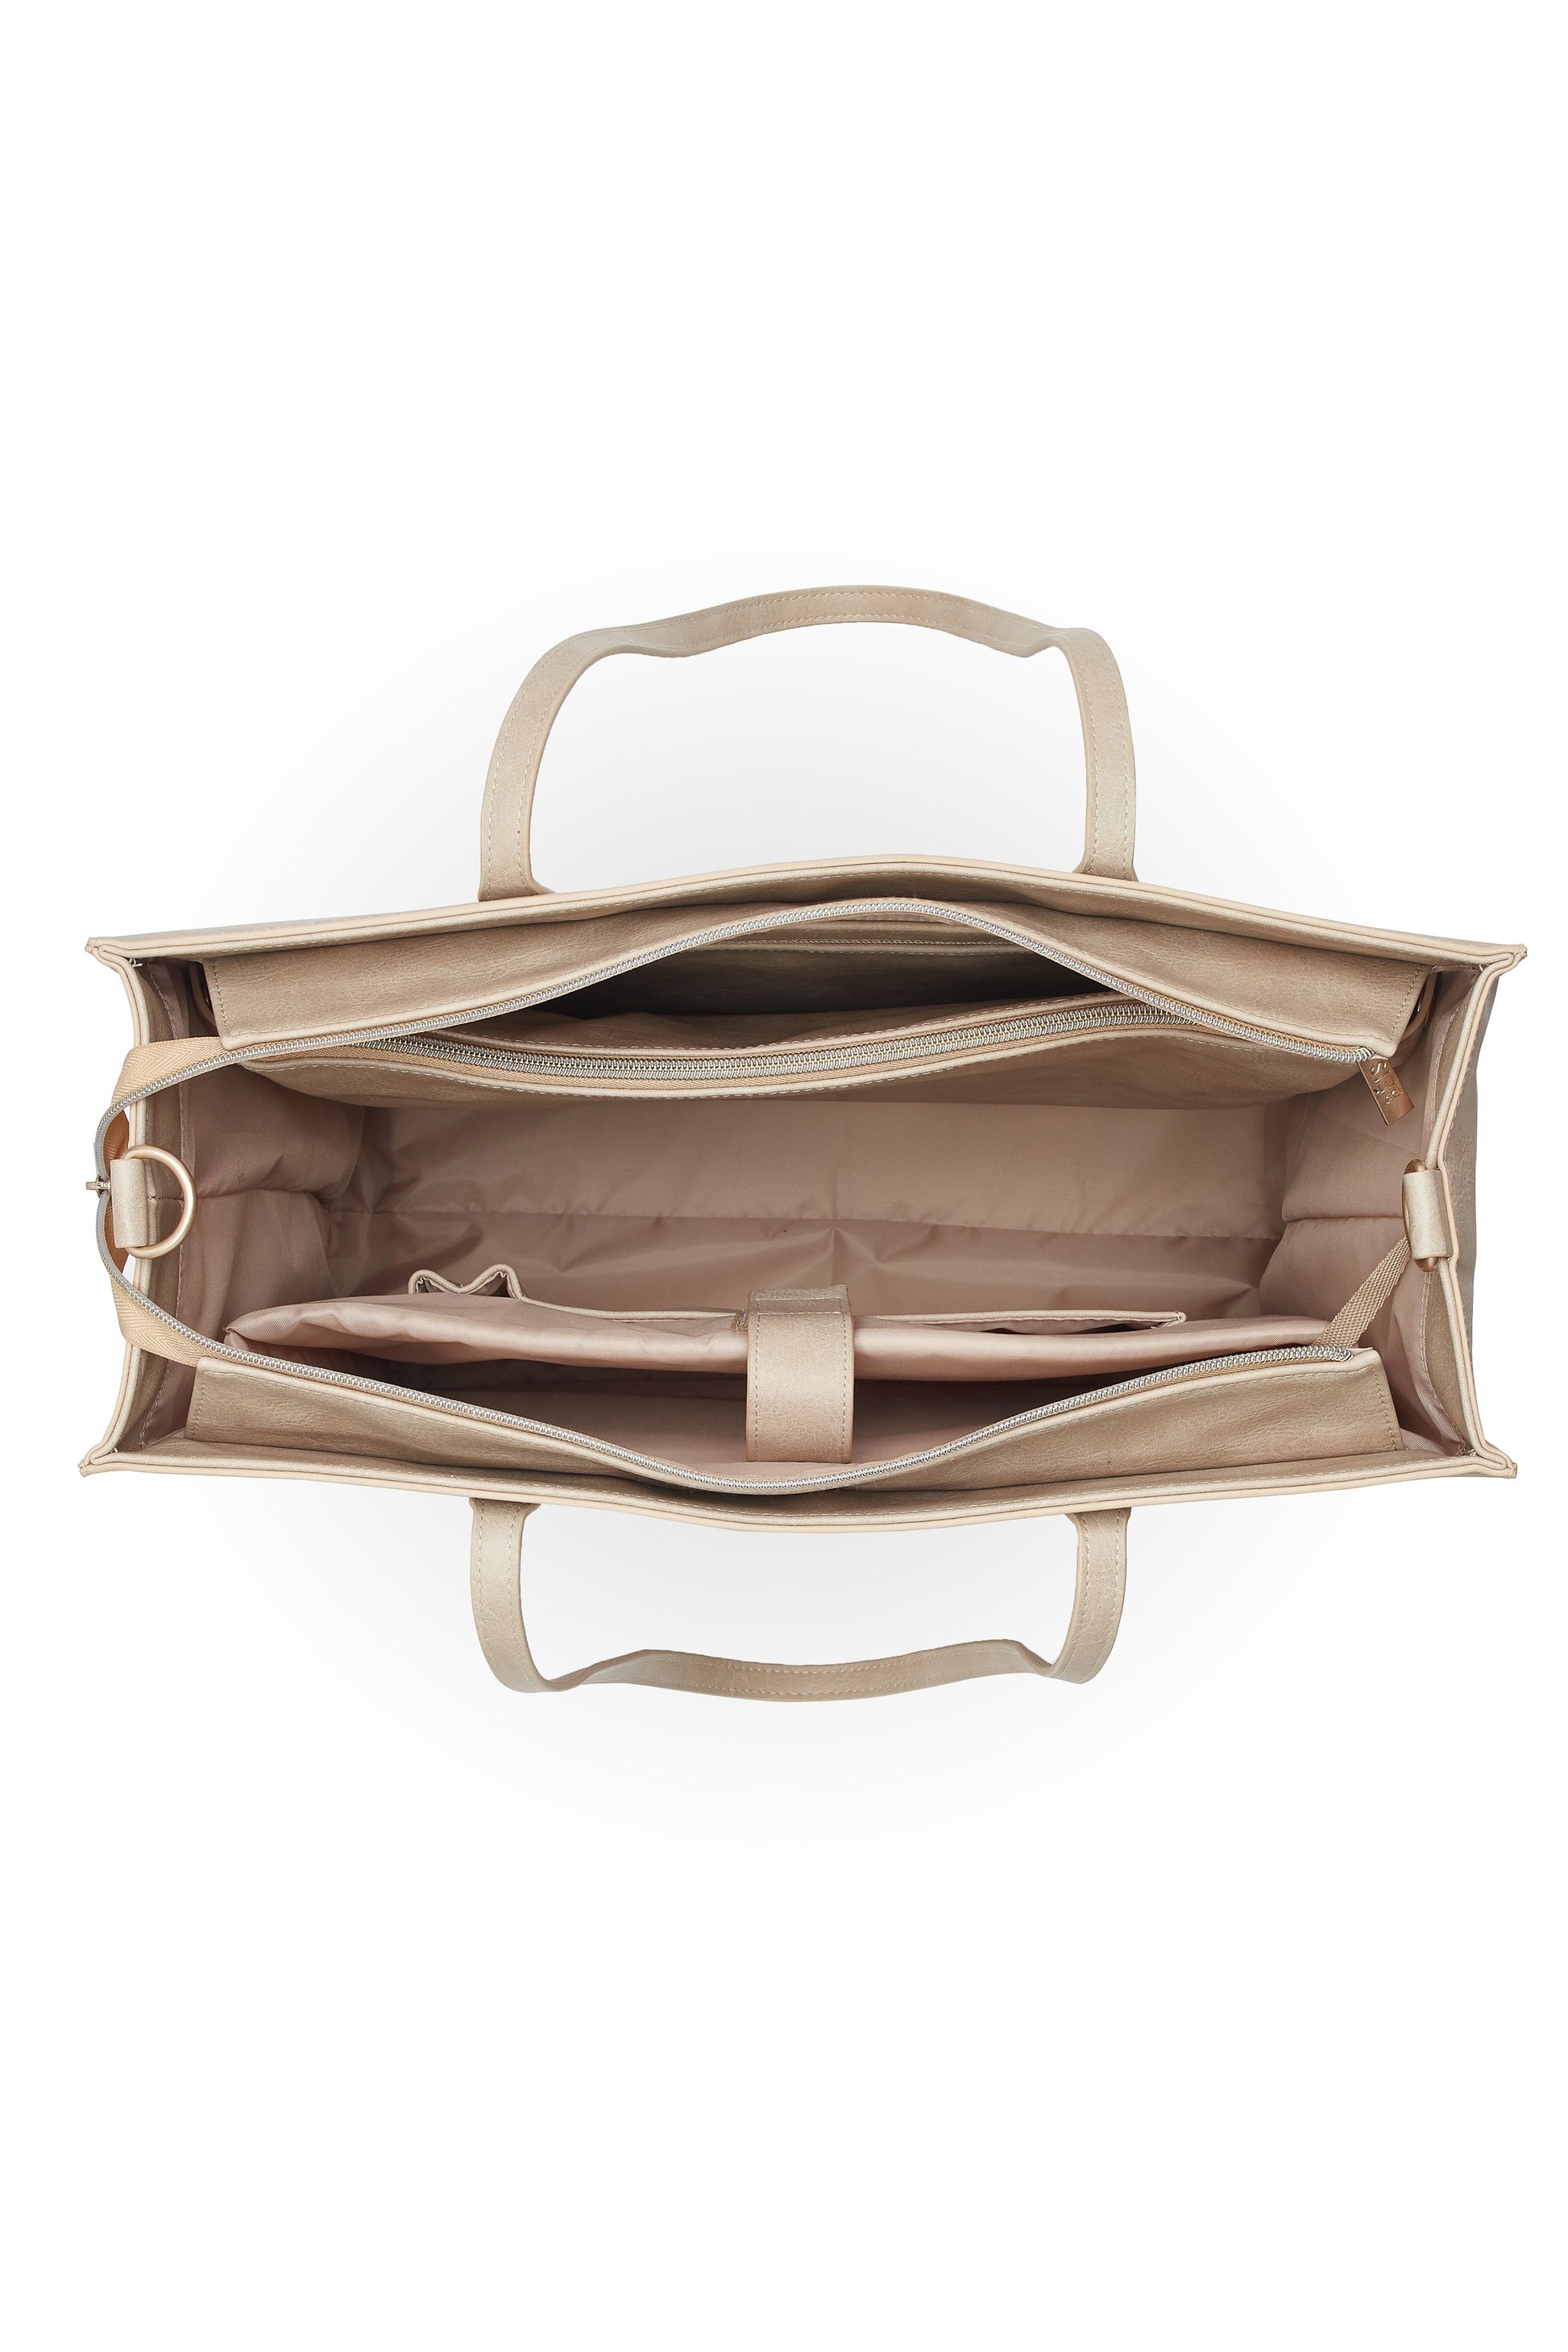 BÉIS 'The Work Tote' in Beige - Small Work Bag For Women & Laptop Bag